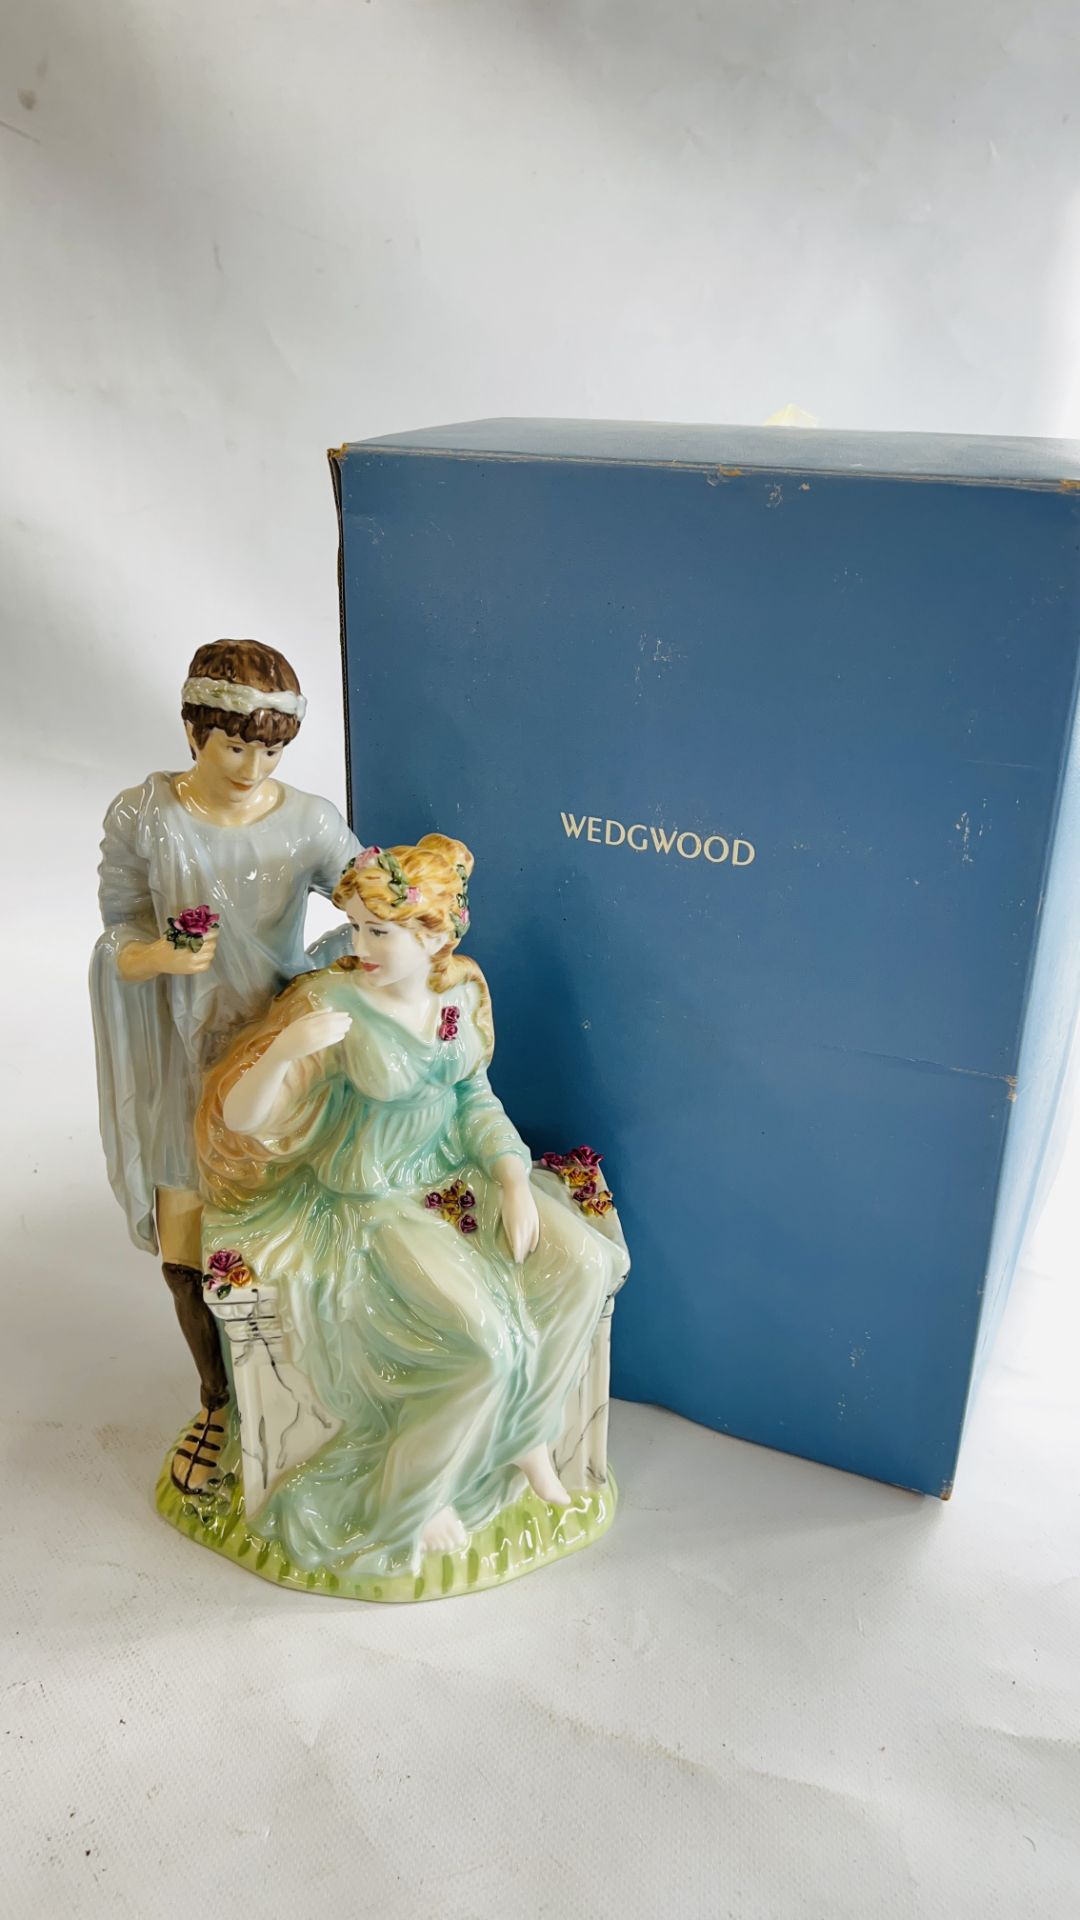 A WEDGWOOD LIMITED EDITION 920/3000 FIGURINE THE CLASSICAL COLLECTION "ADORATION" BOXED WITH - Image 7 of 7